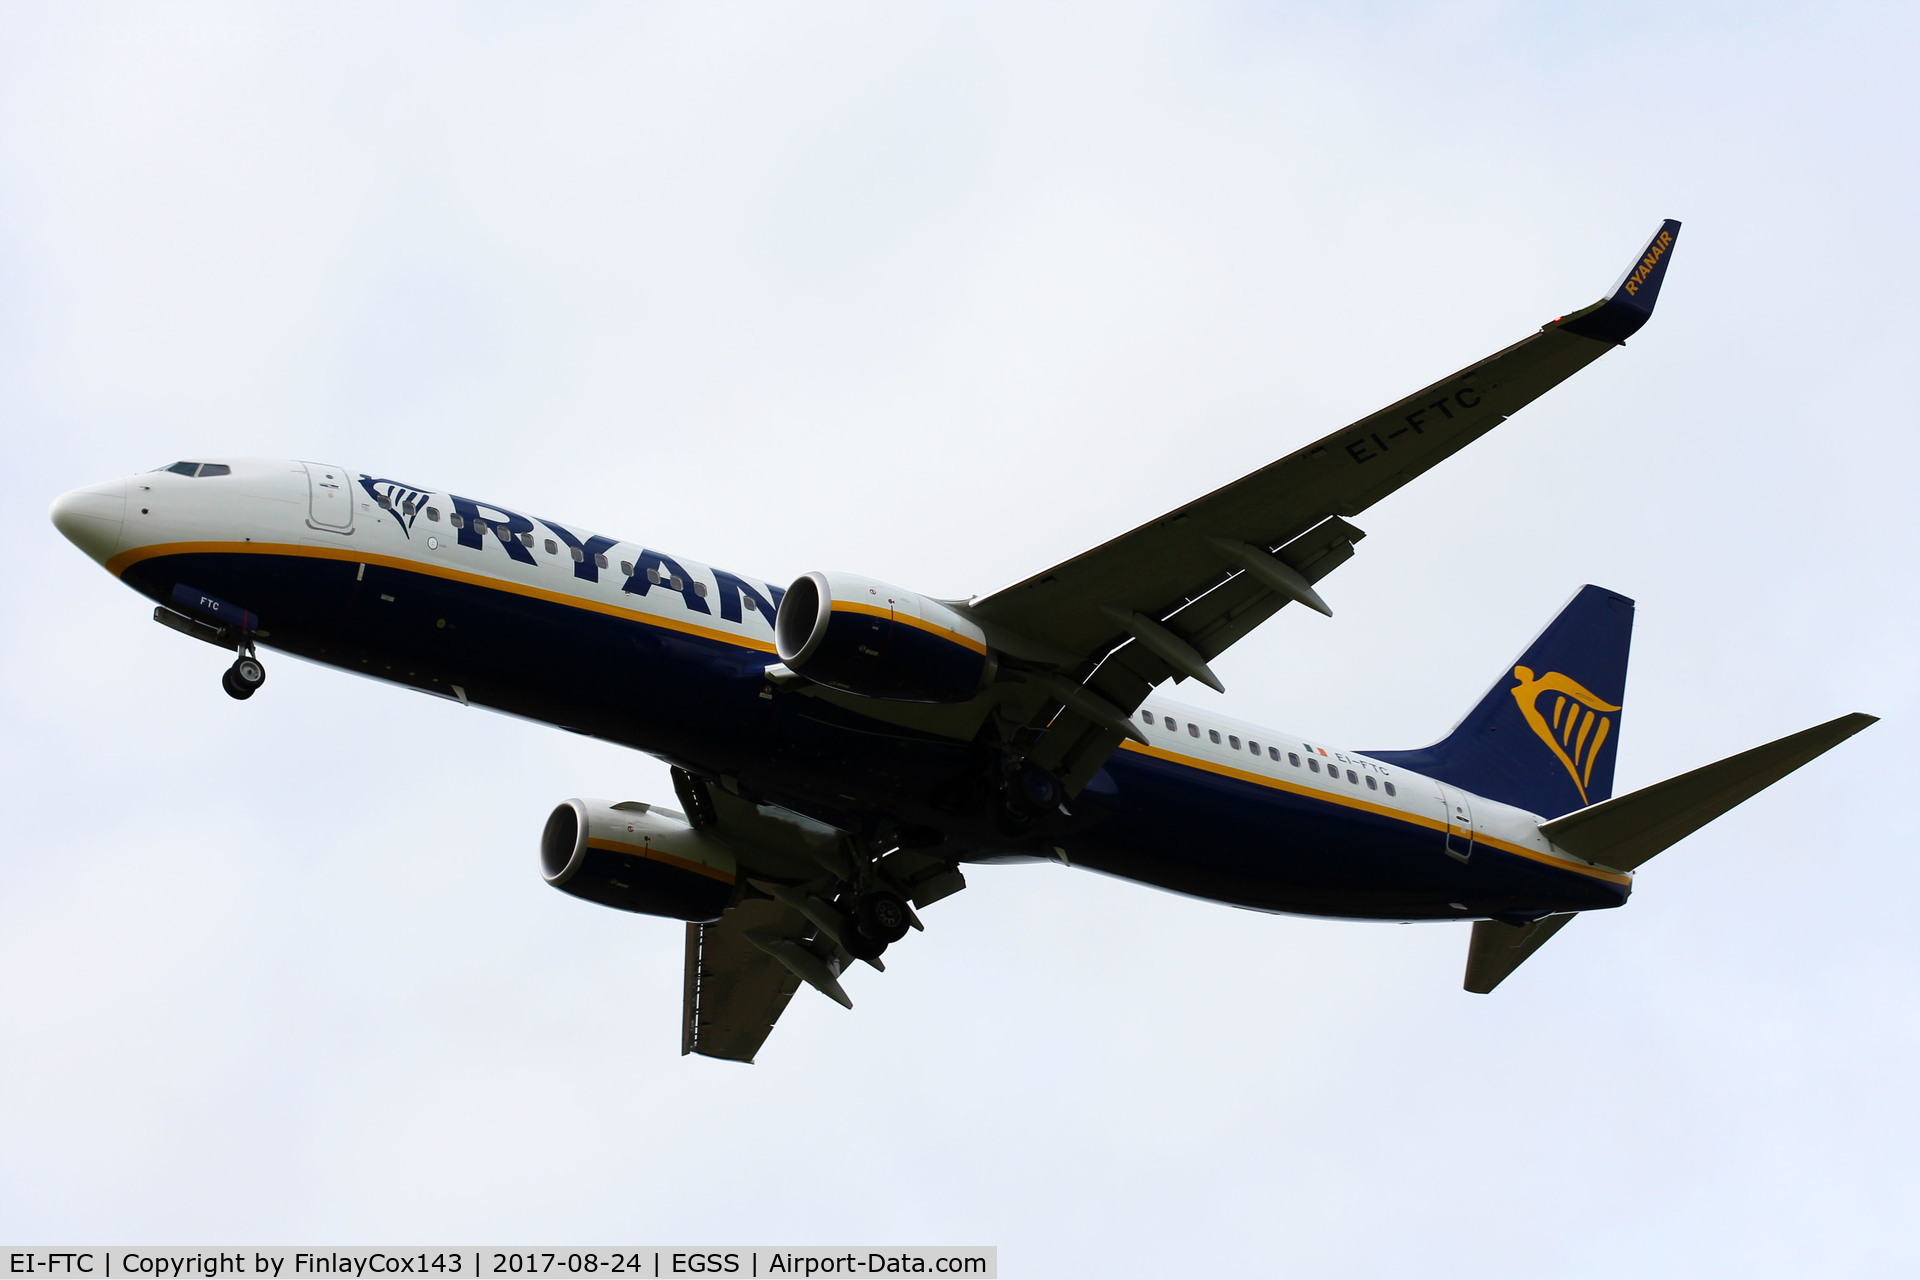 EI-FTC, 2016 Boeing 737-8AS C/N 44753, Landing at London Stansted (STN) from Cork (ORK) as FR909